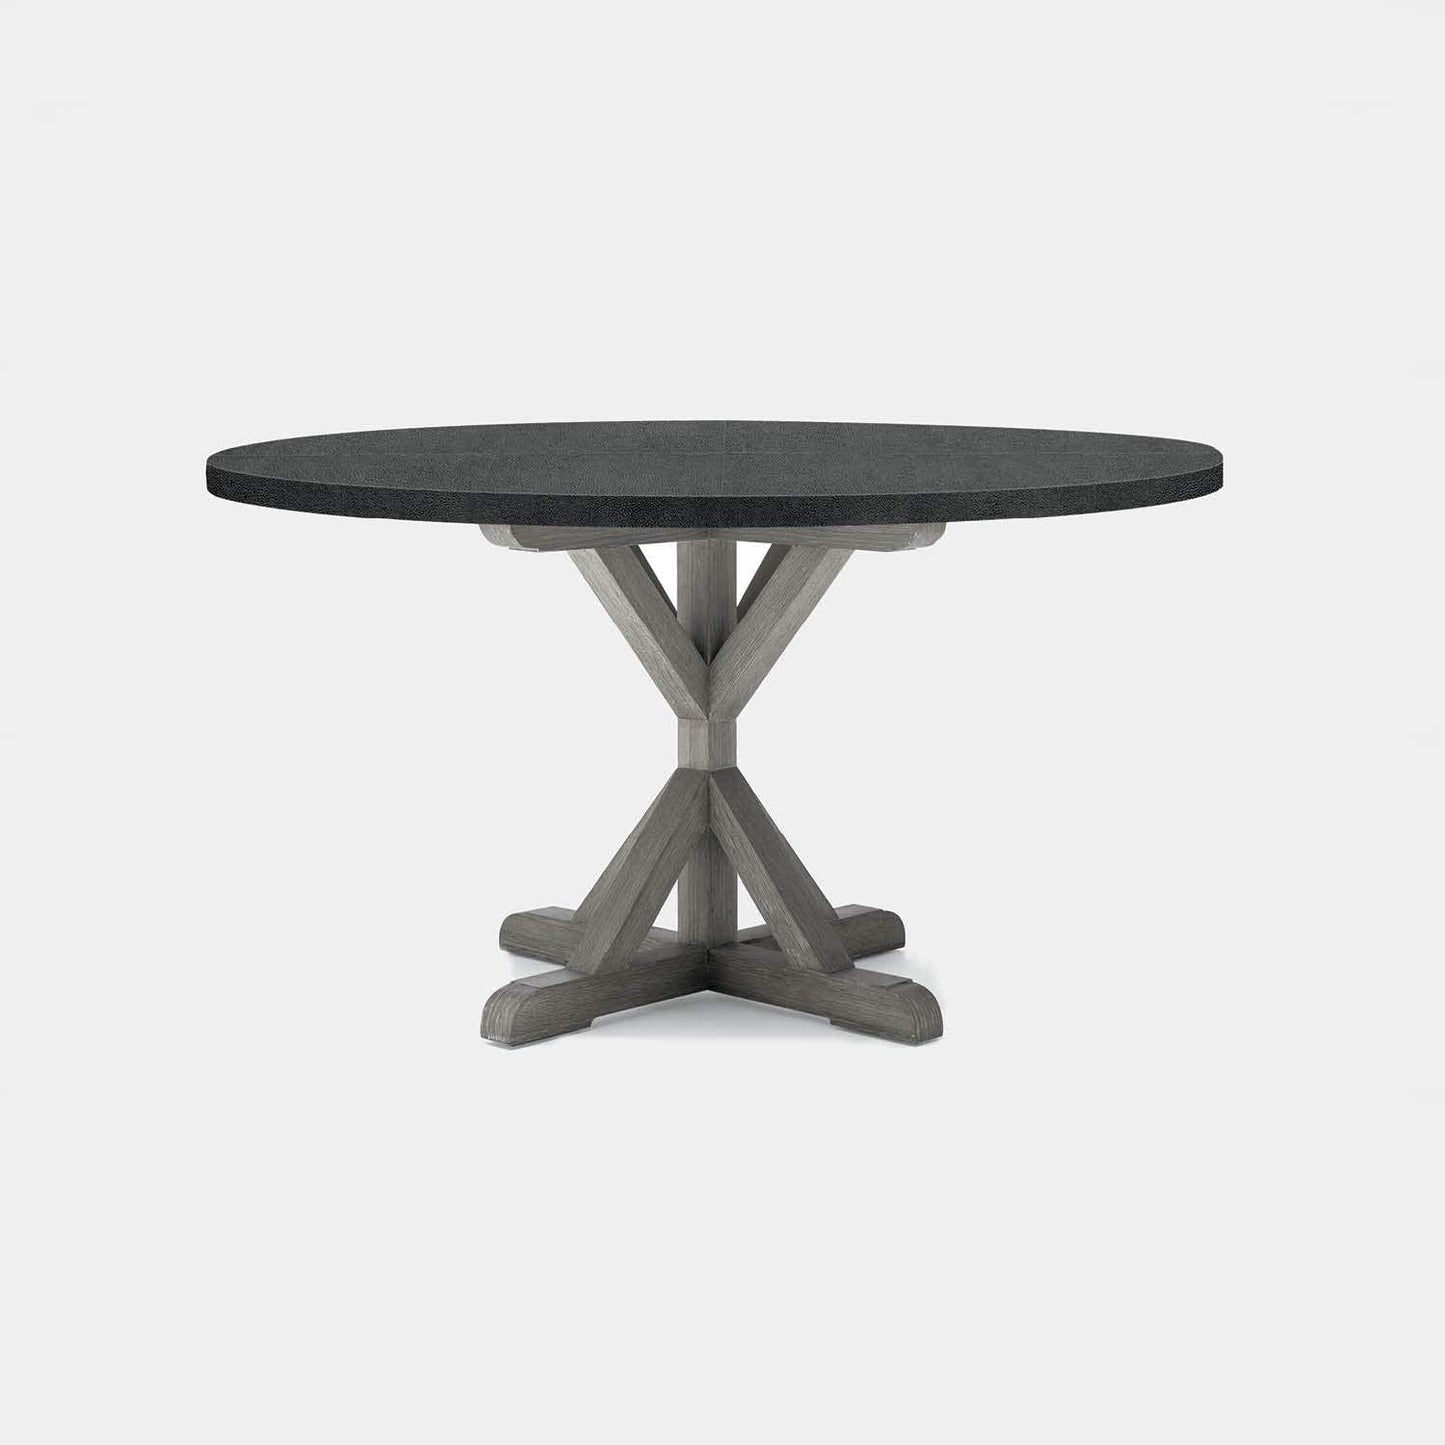 Made Goods Dane 72" x 30" Gray Cerused Oak Dinning Table With Round Black Vintage Faux Shagreen Table Top